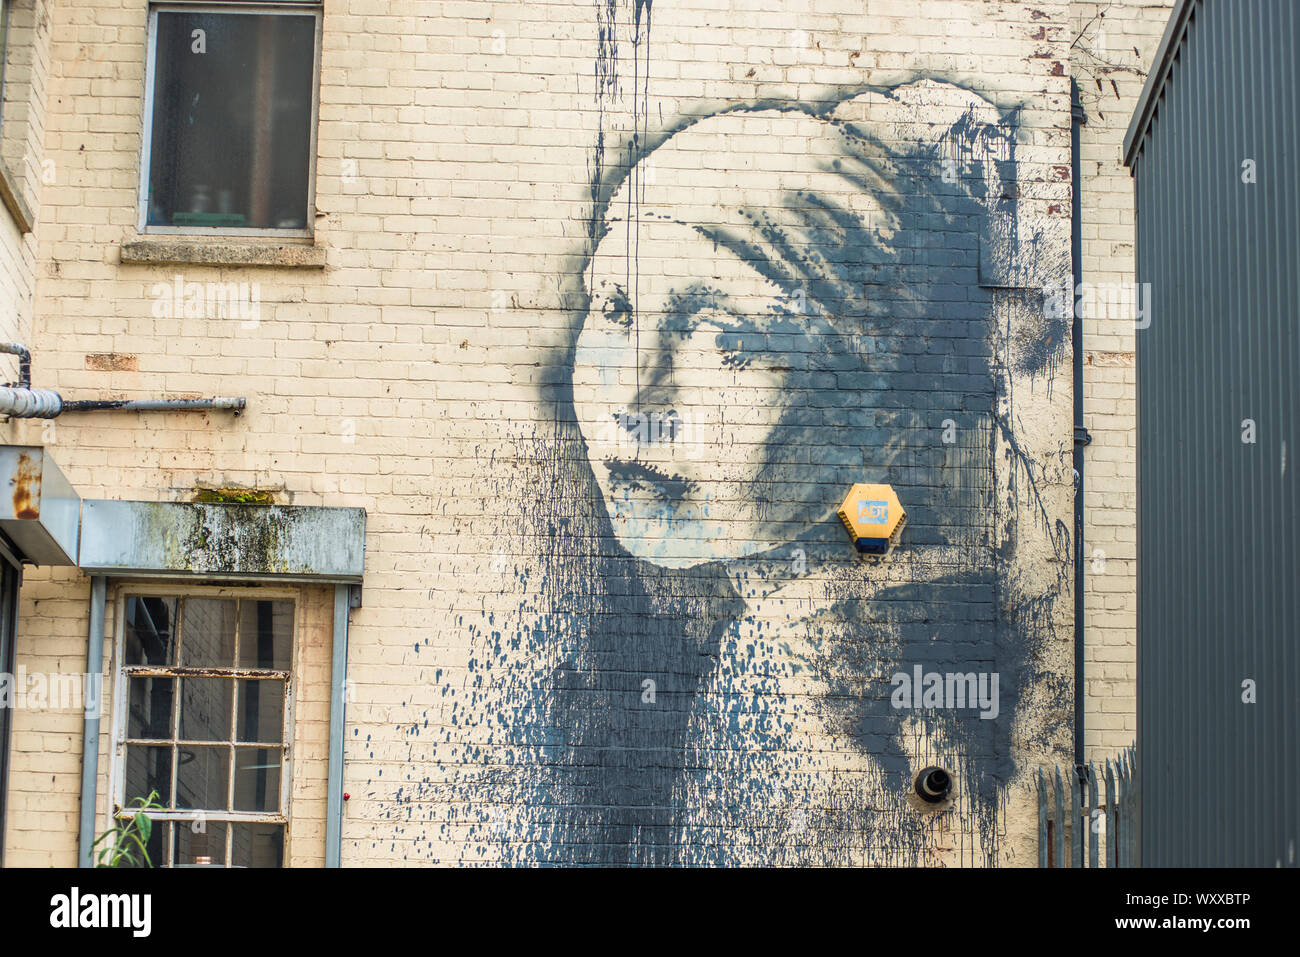 Girl with a pierced eardrum - an artwork based around a burglar alarm by artist Banksy on the wall of an alley in Albion Docks, Bristol, England, UK Stock Photo